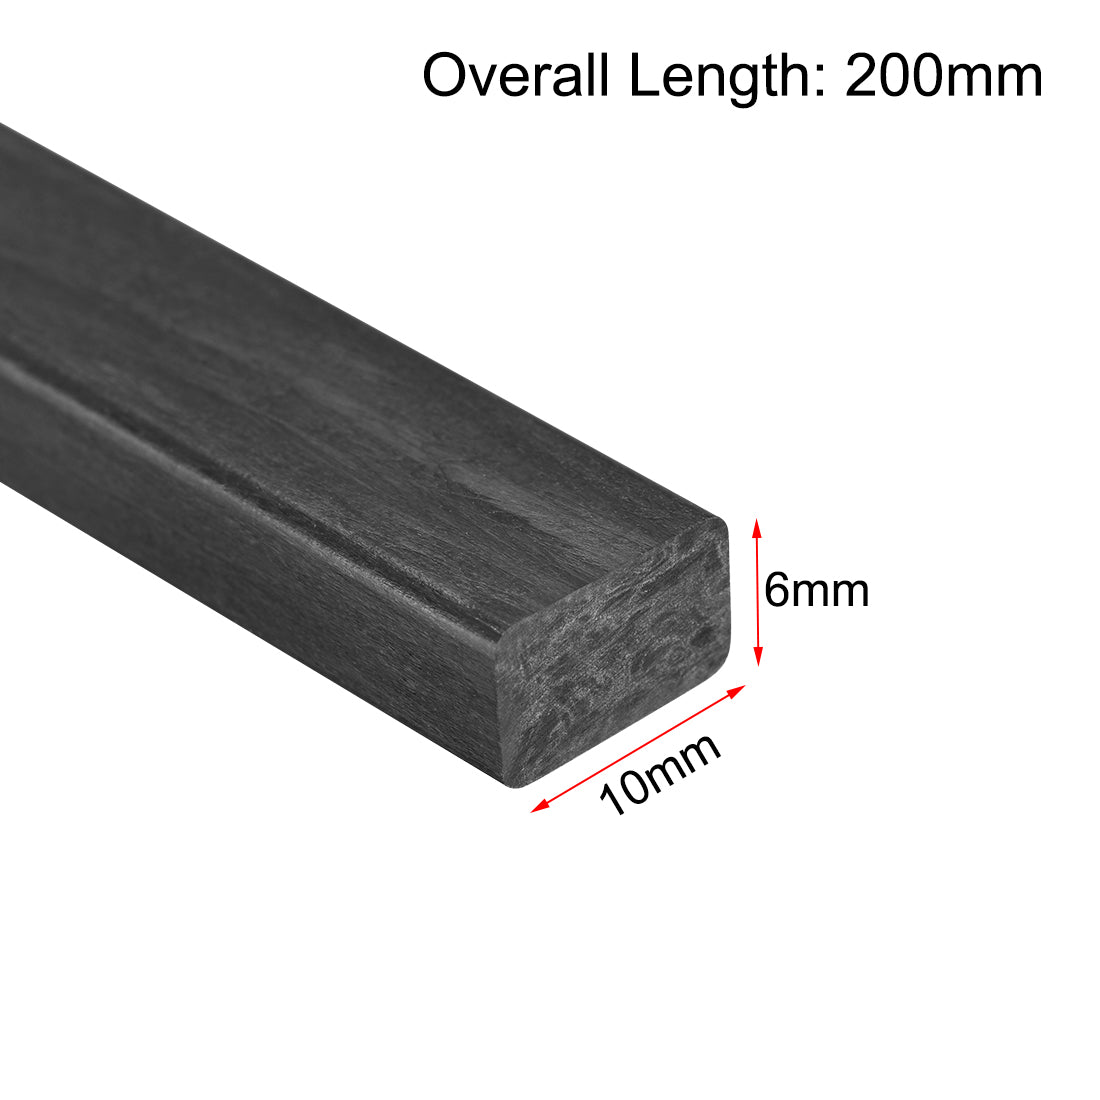 uxcell Uxcell Carbon Fiber Strip Bars 6x10mm 200mm Length Pultruded Carbon Fiber Strips for Kites, RC Airplane 1 Pcs